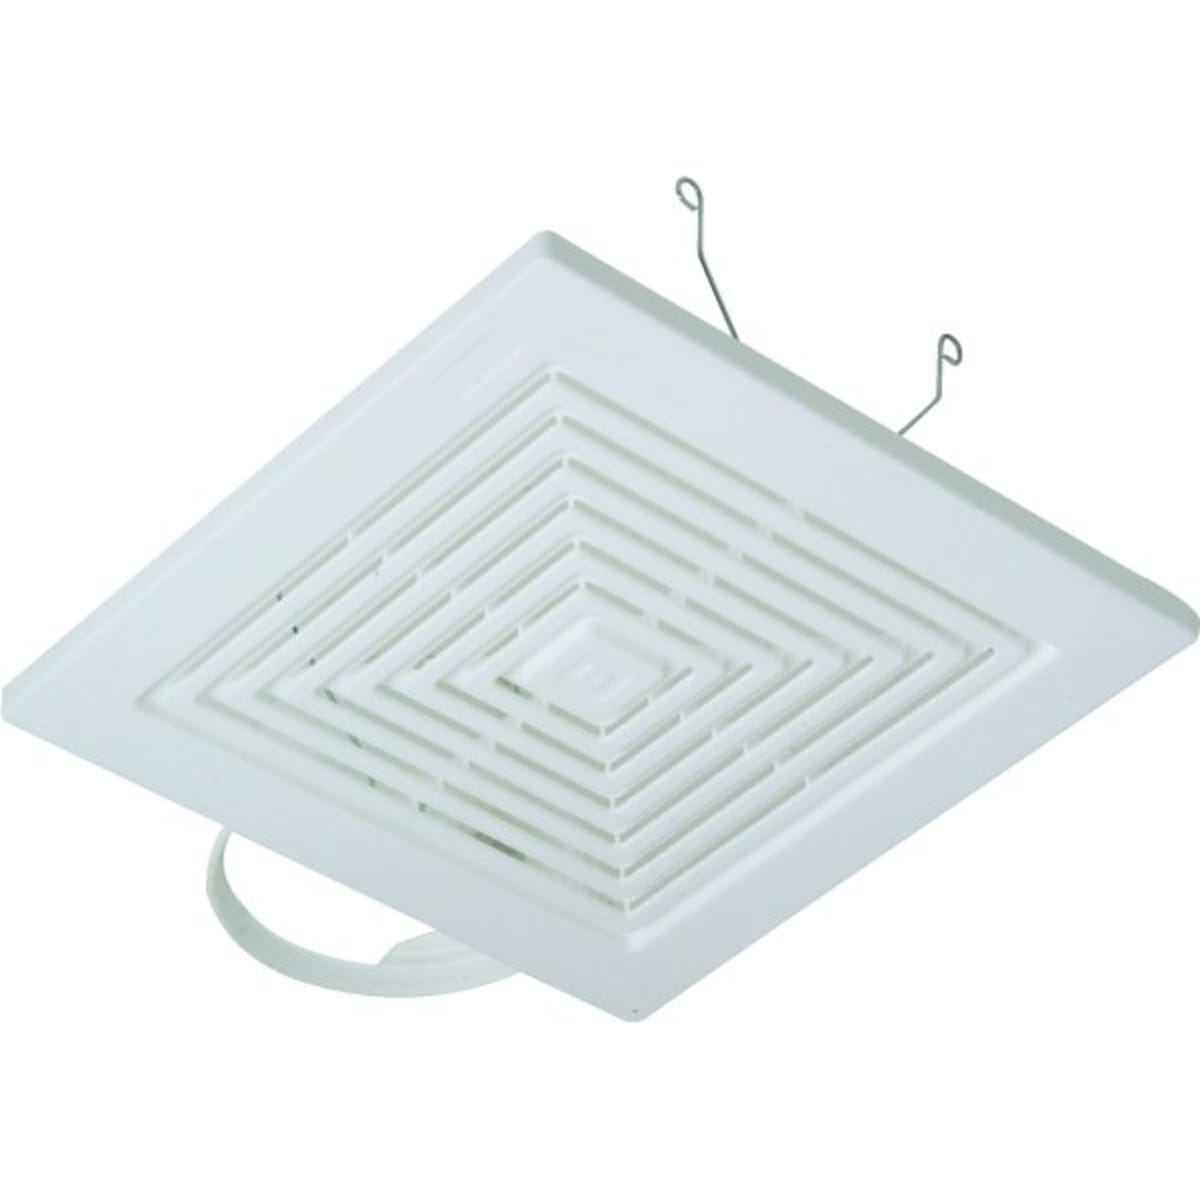 Exhaust Fans Grilles Hd Supply pertaining to measurements 1200 X 1200